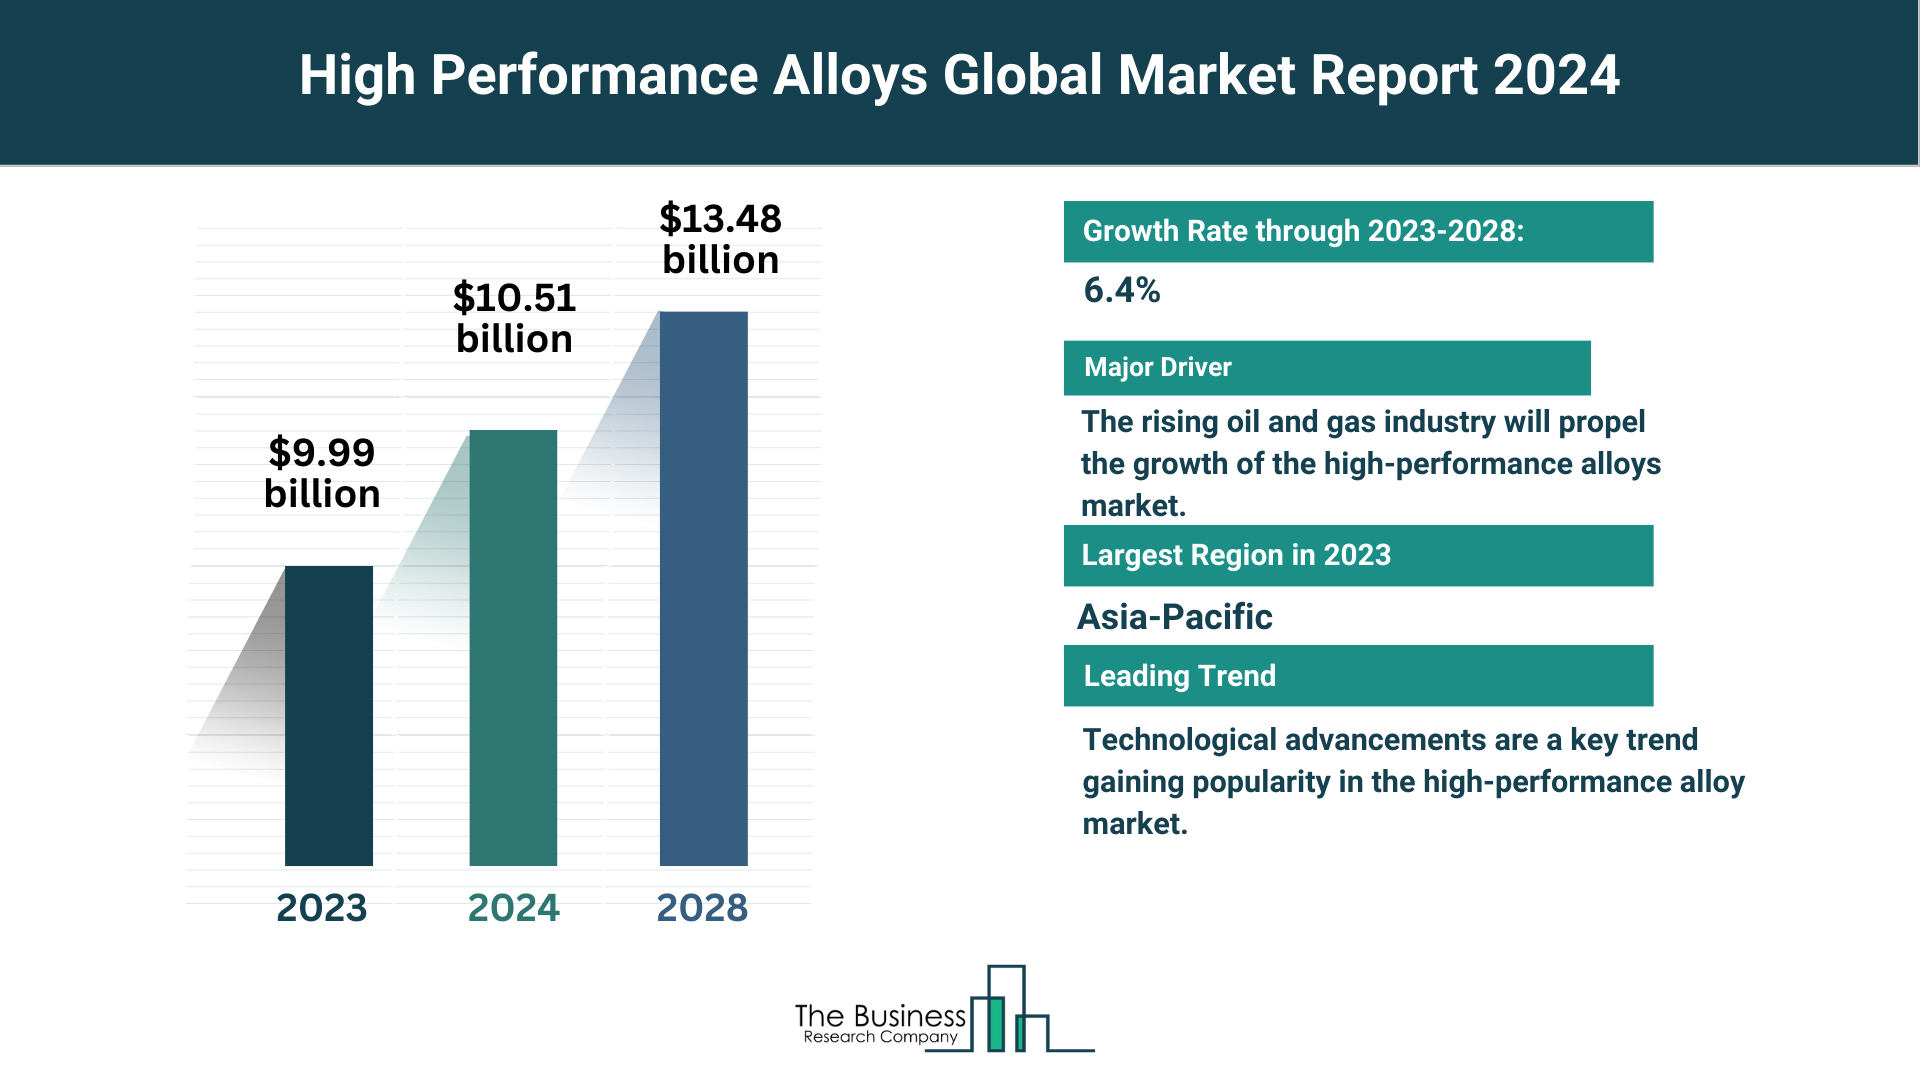 5 Key Takeaways From The High Performance Alloys Market Report 2024